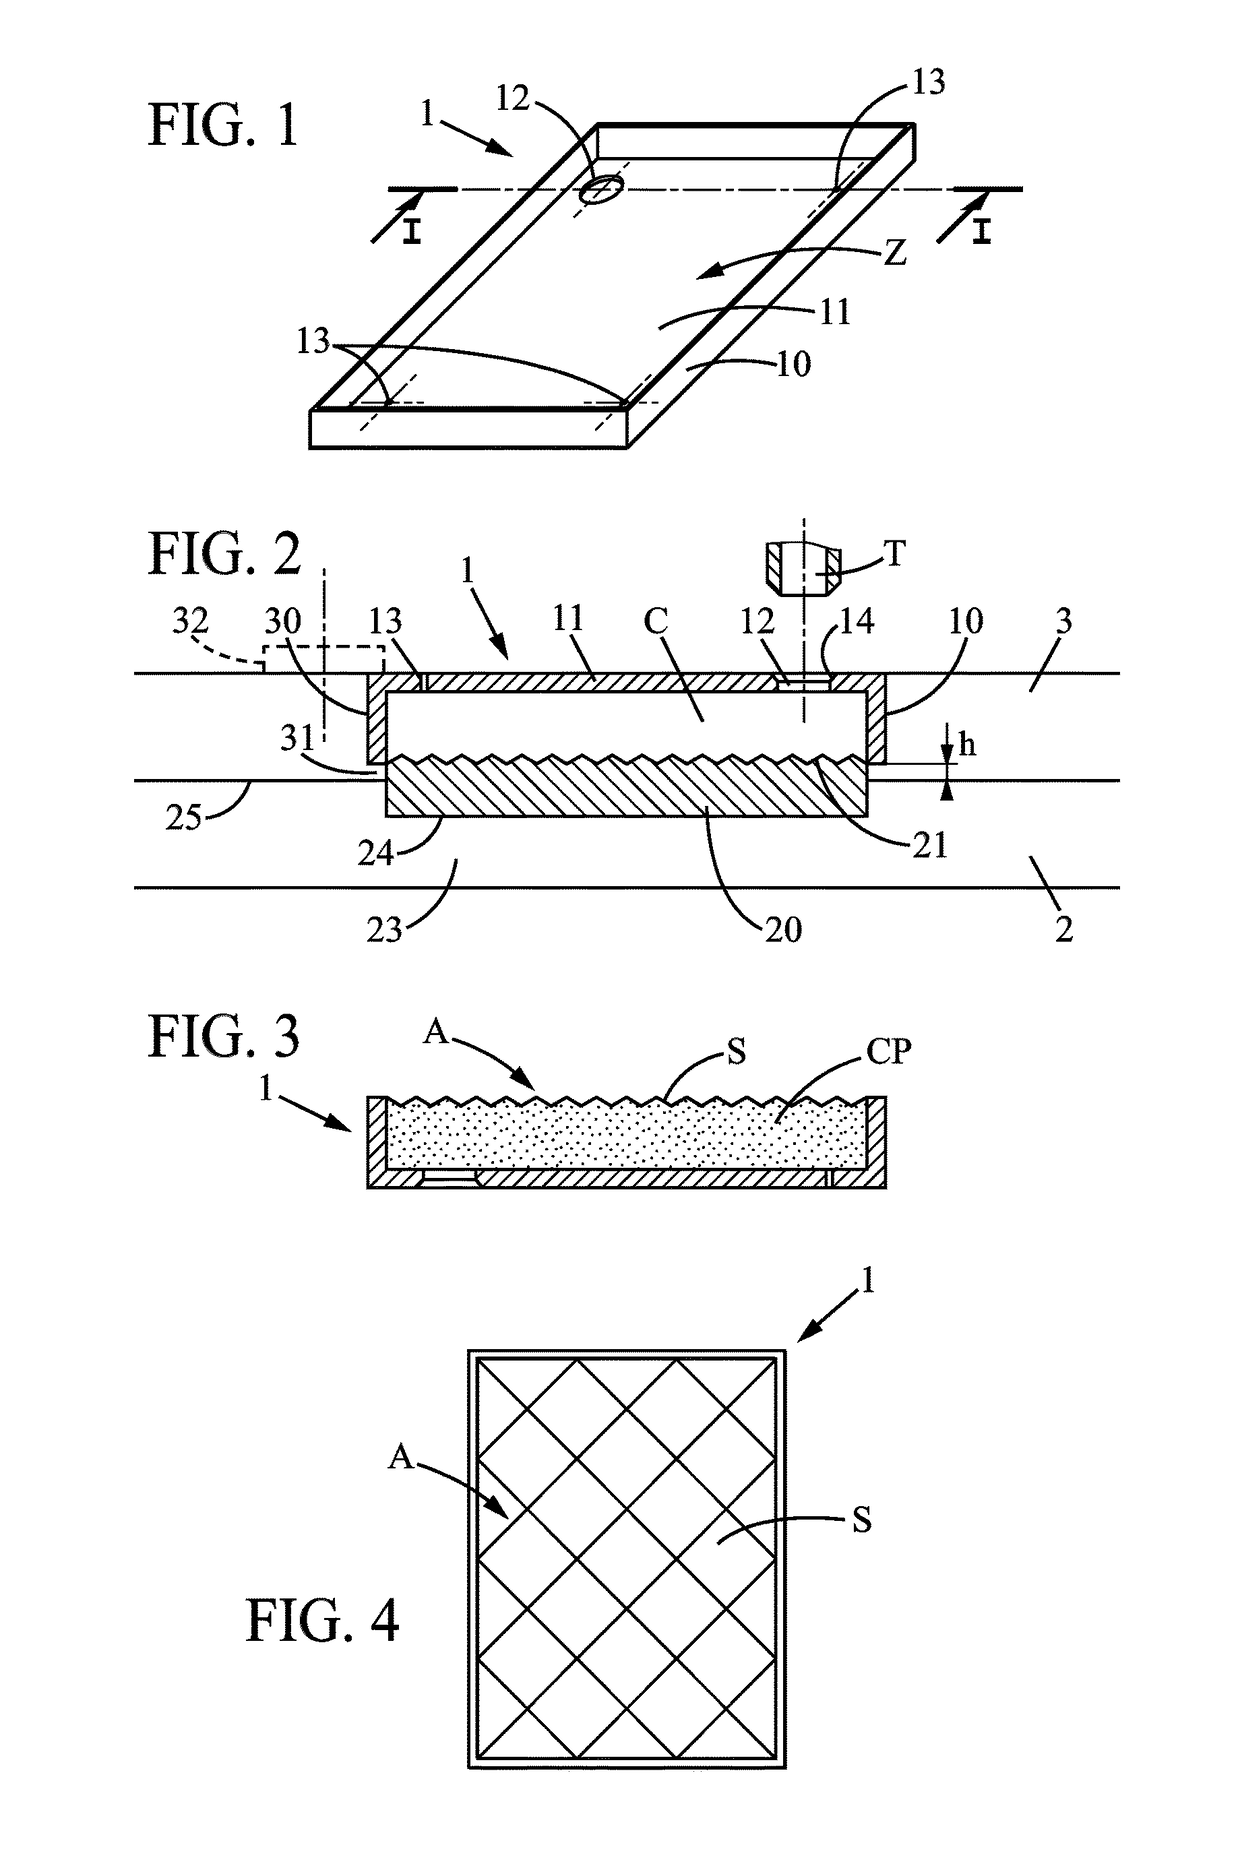 Method for manufacturing a cosmetic article having a decorative embossed and/or debossed surface